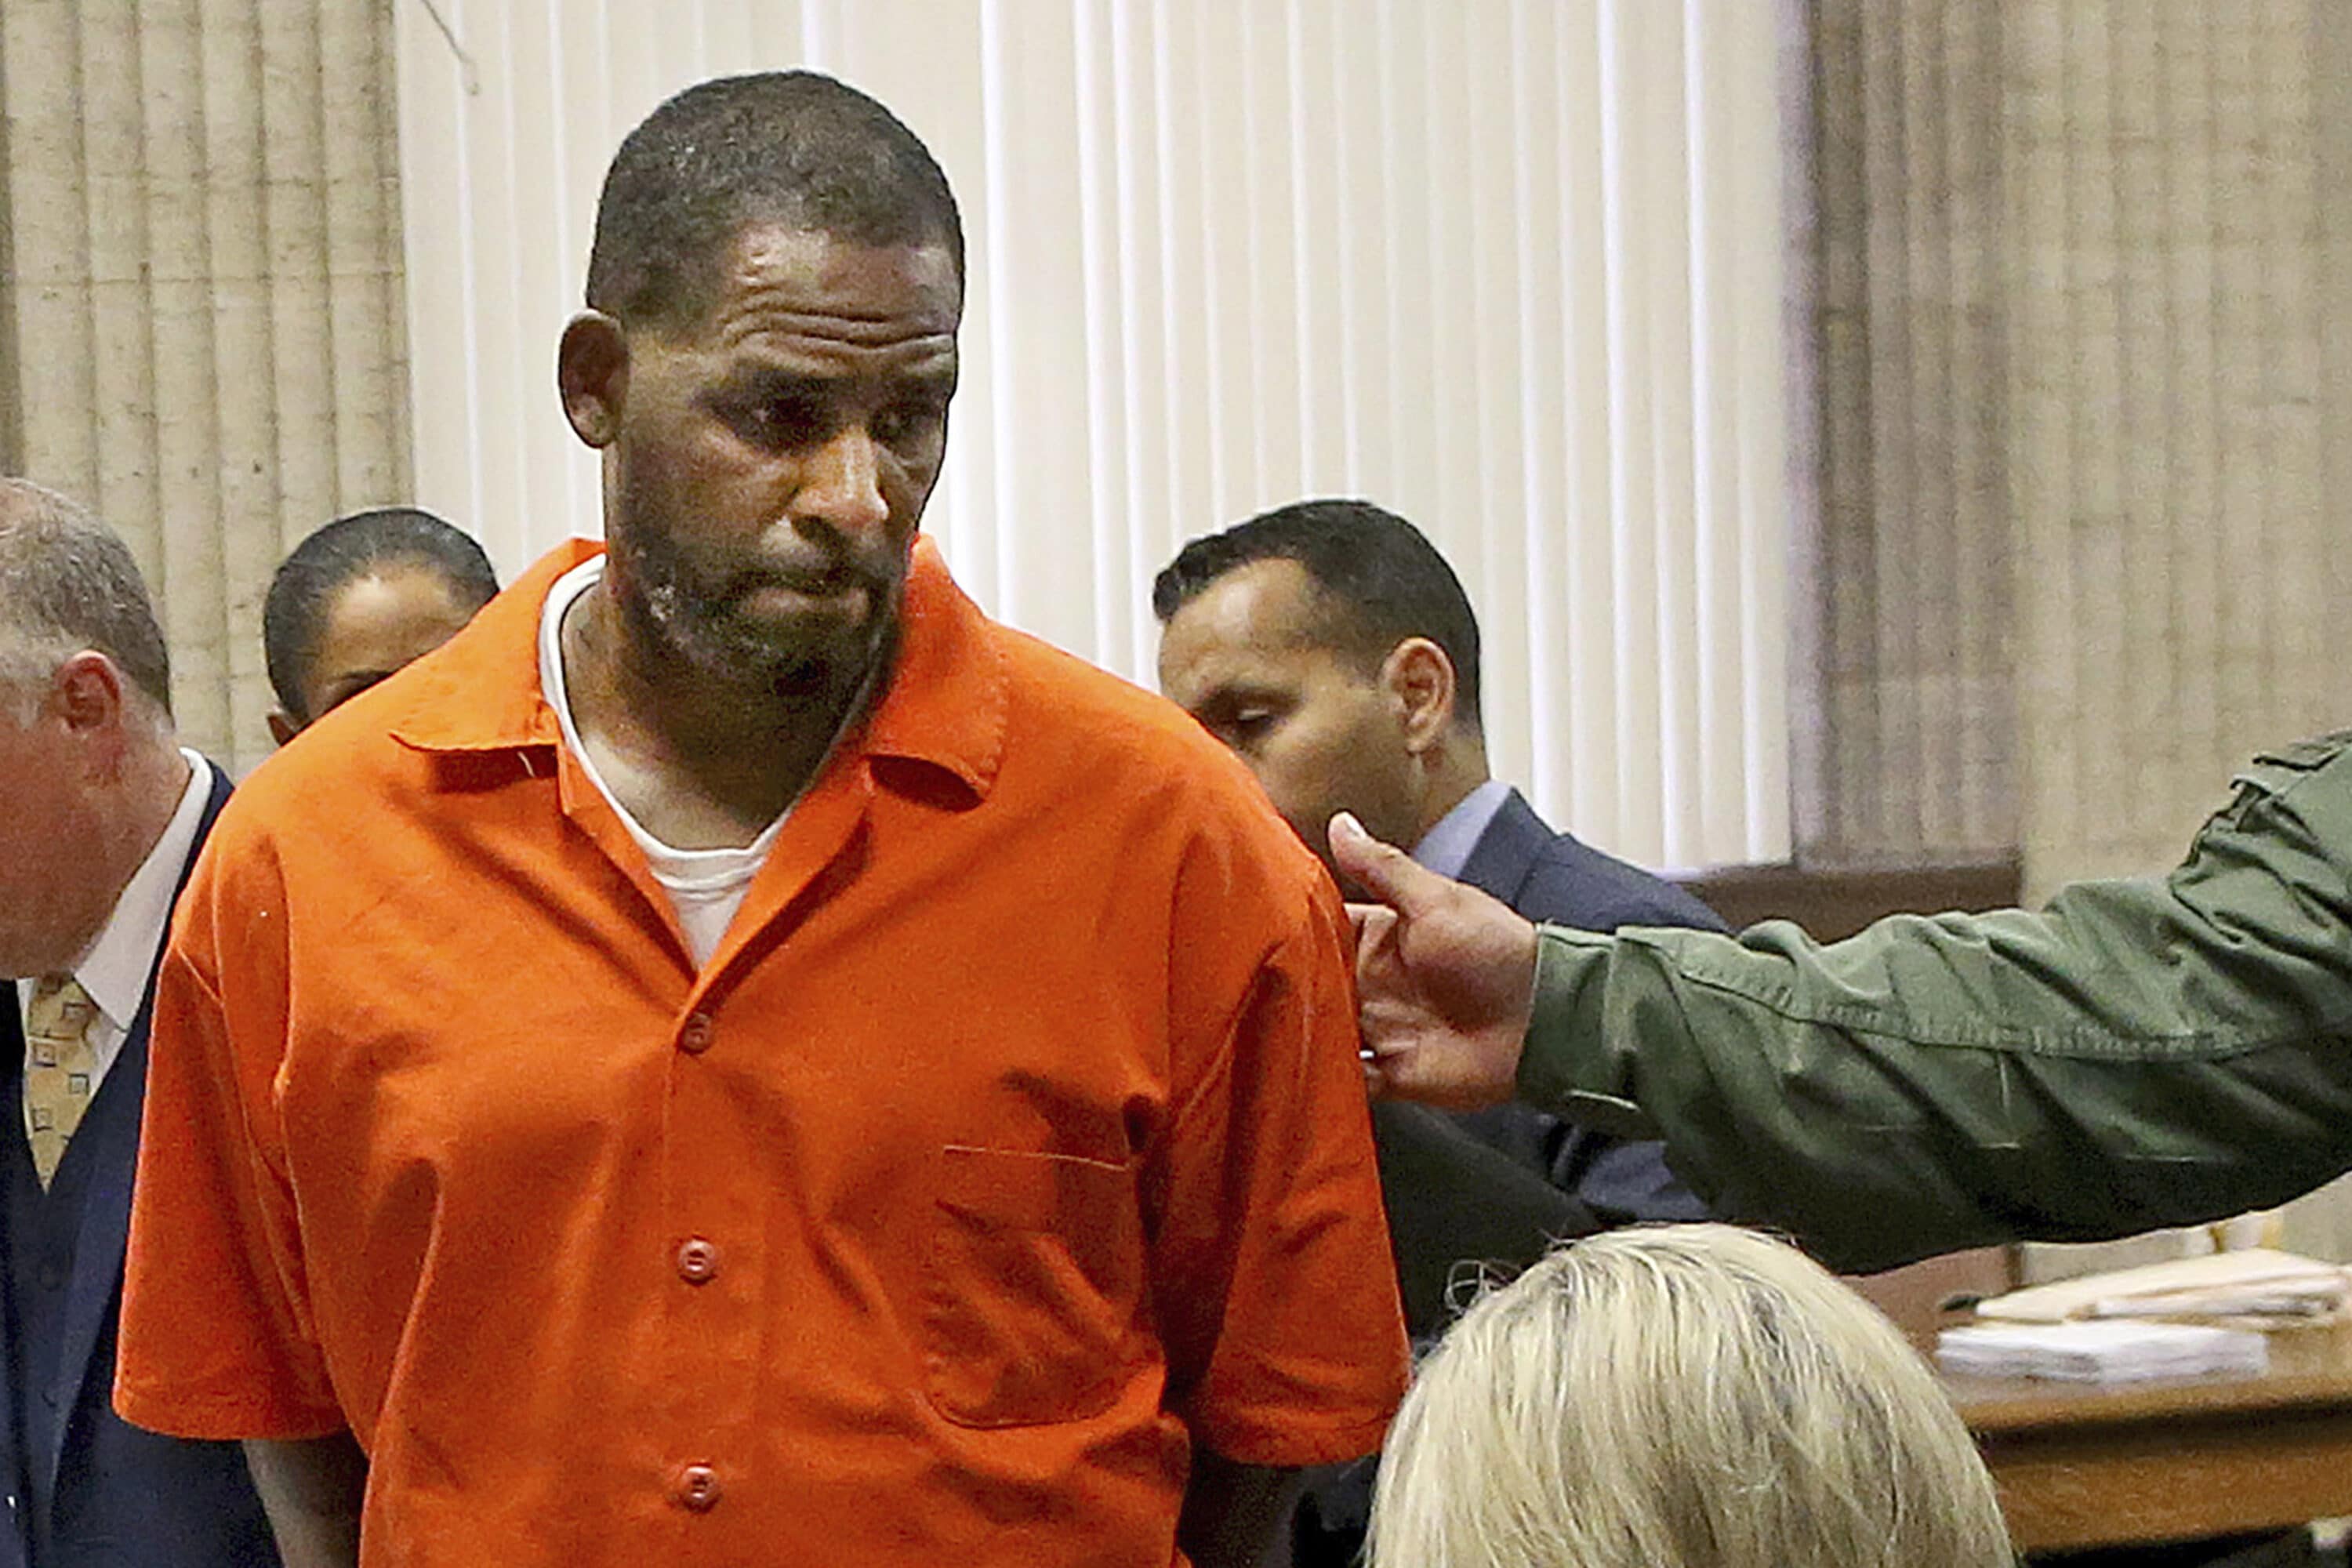 More alleged R. Kelly victims come forward as trial enters third week |  Courthouse News Service